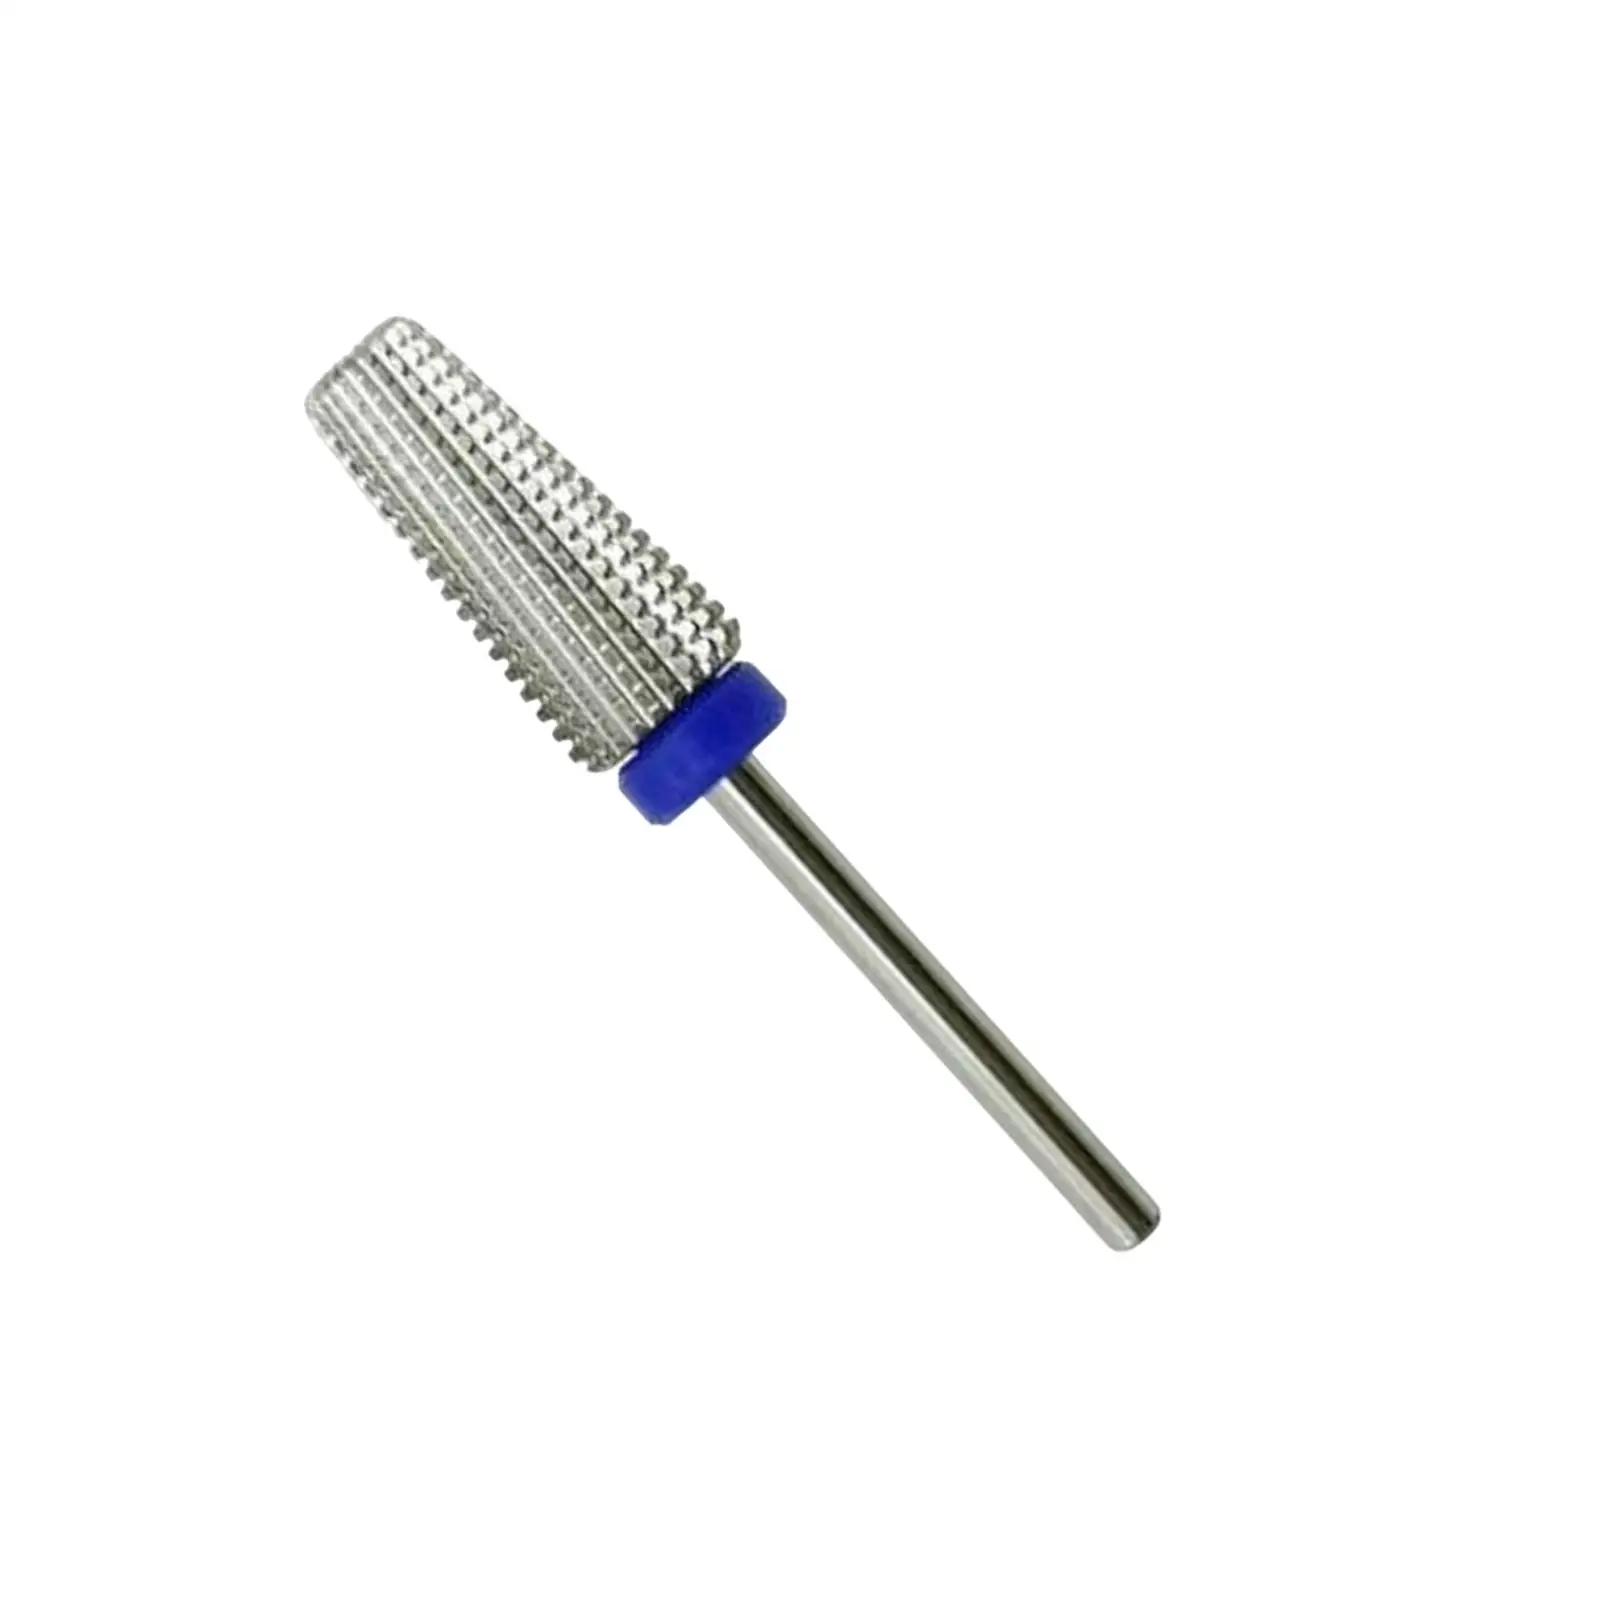 Multifunctional Nail Drill Bit Practical Replacement Cuticle Remover for Home Salon Use